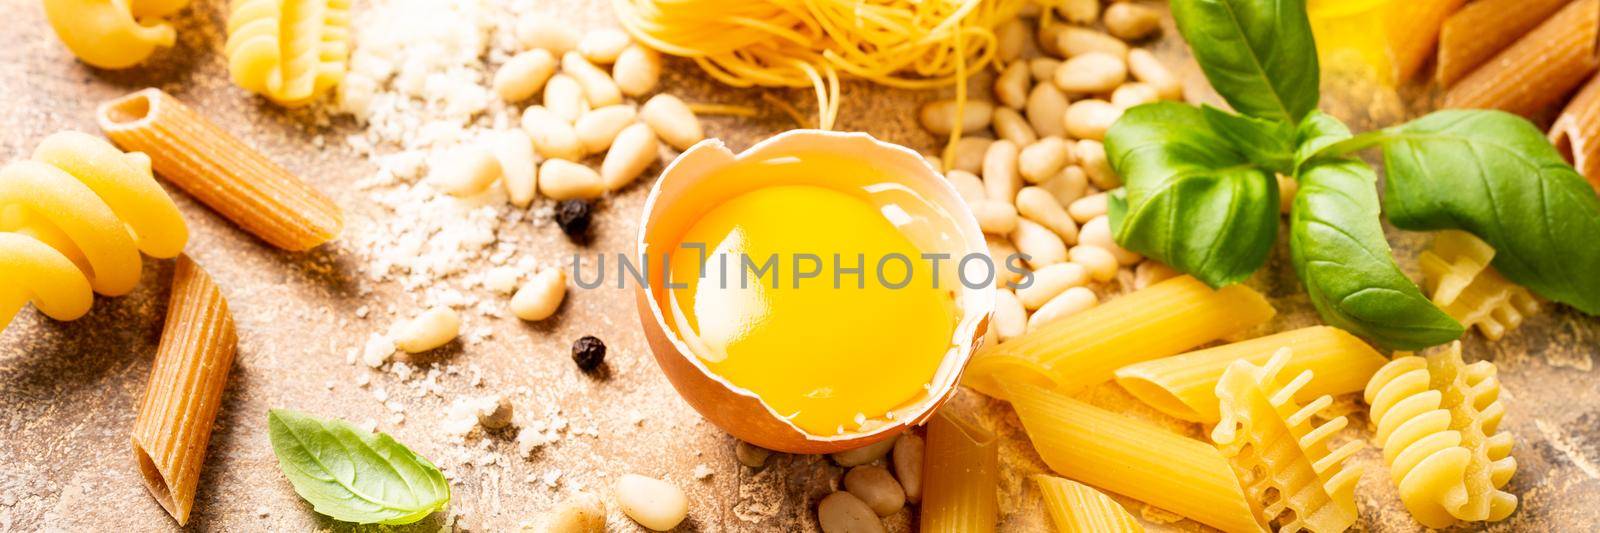 Healthy raw ingredients for italian pasta sauce Carbonara with egg, grated cheese, pine nuts, basil and assorted pasta. Food background. Banner.